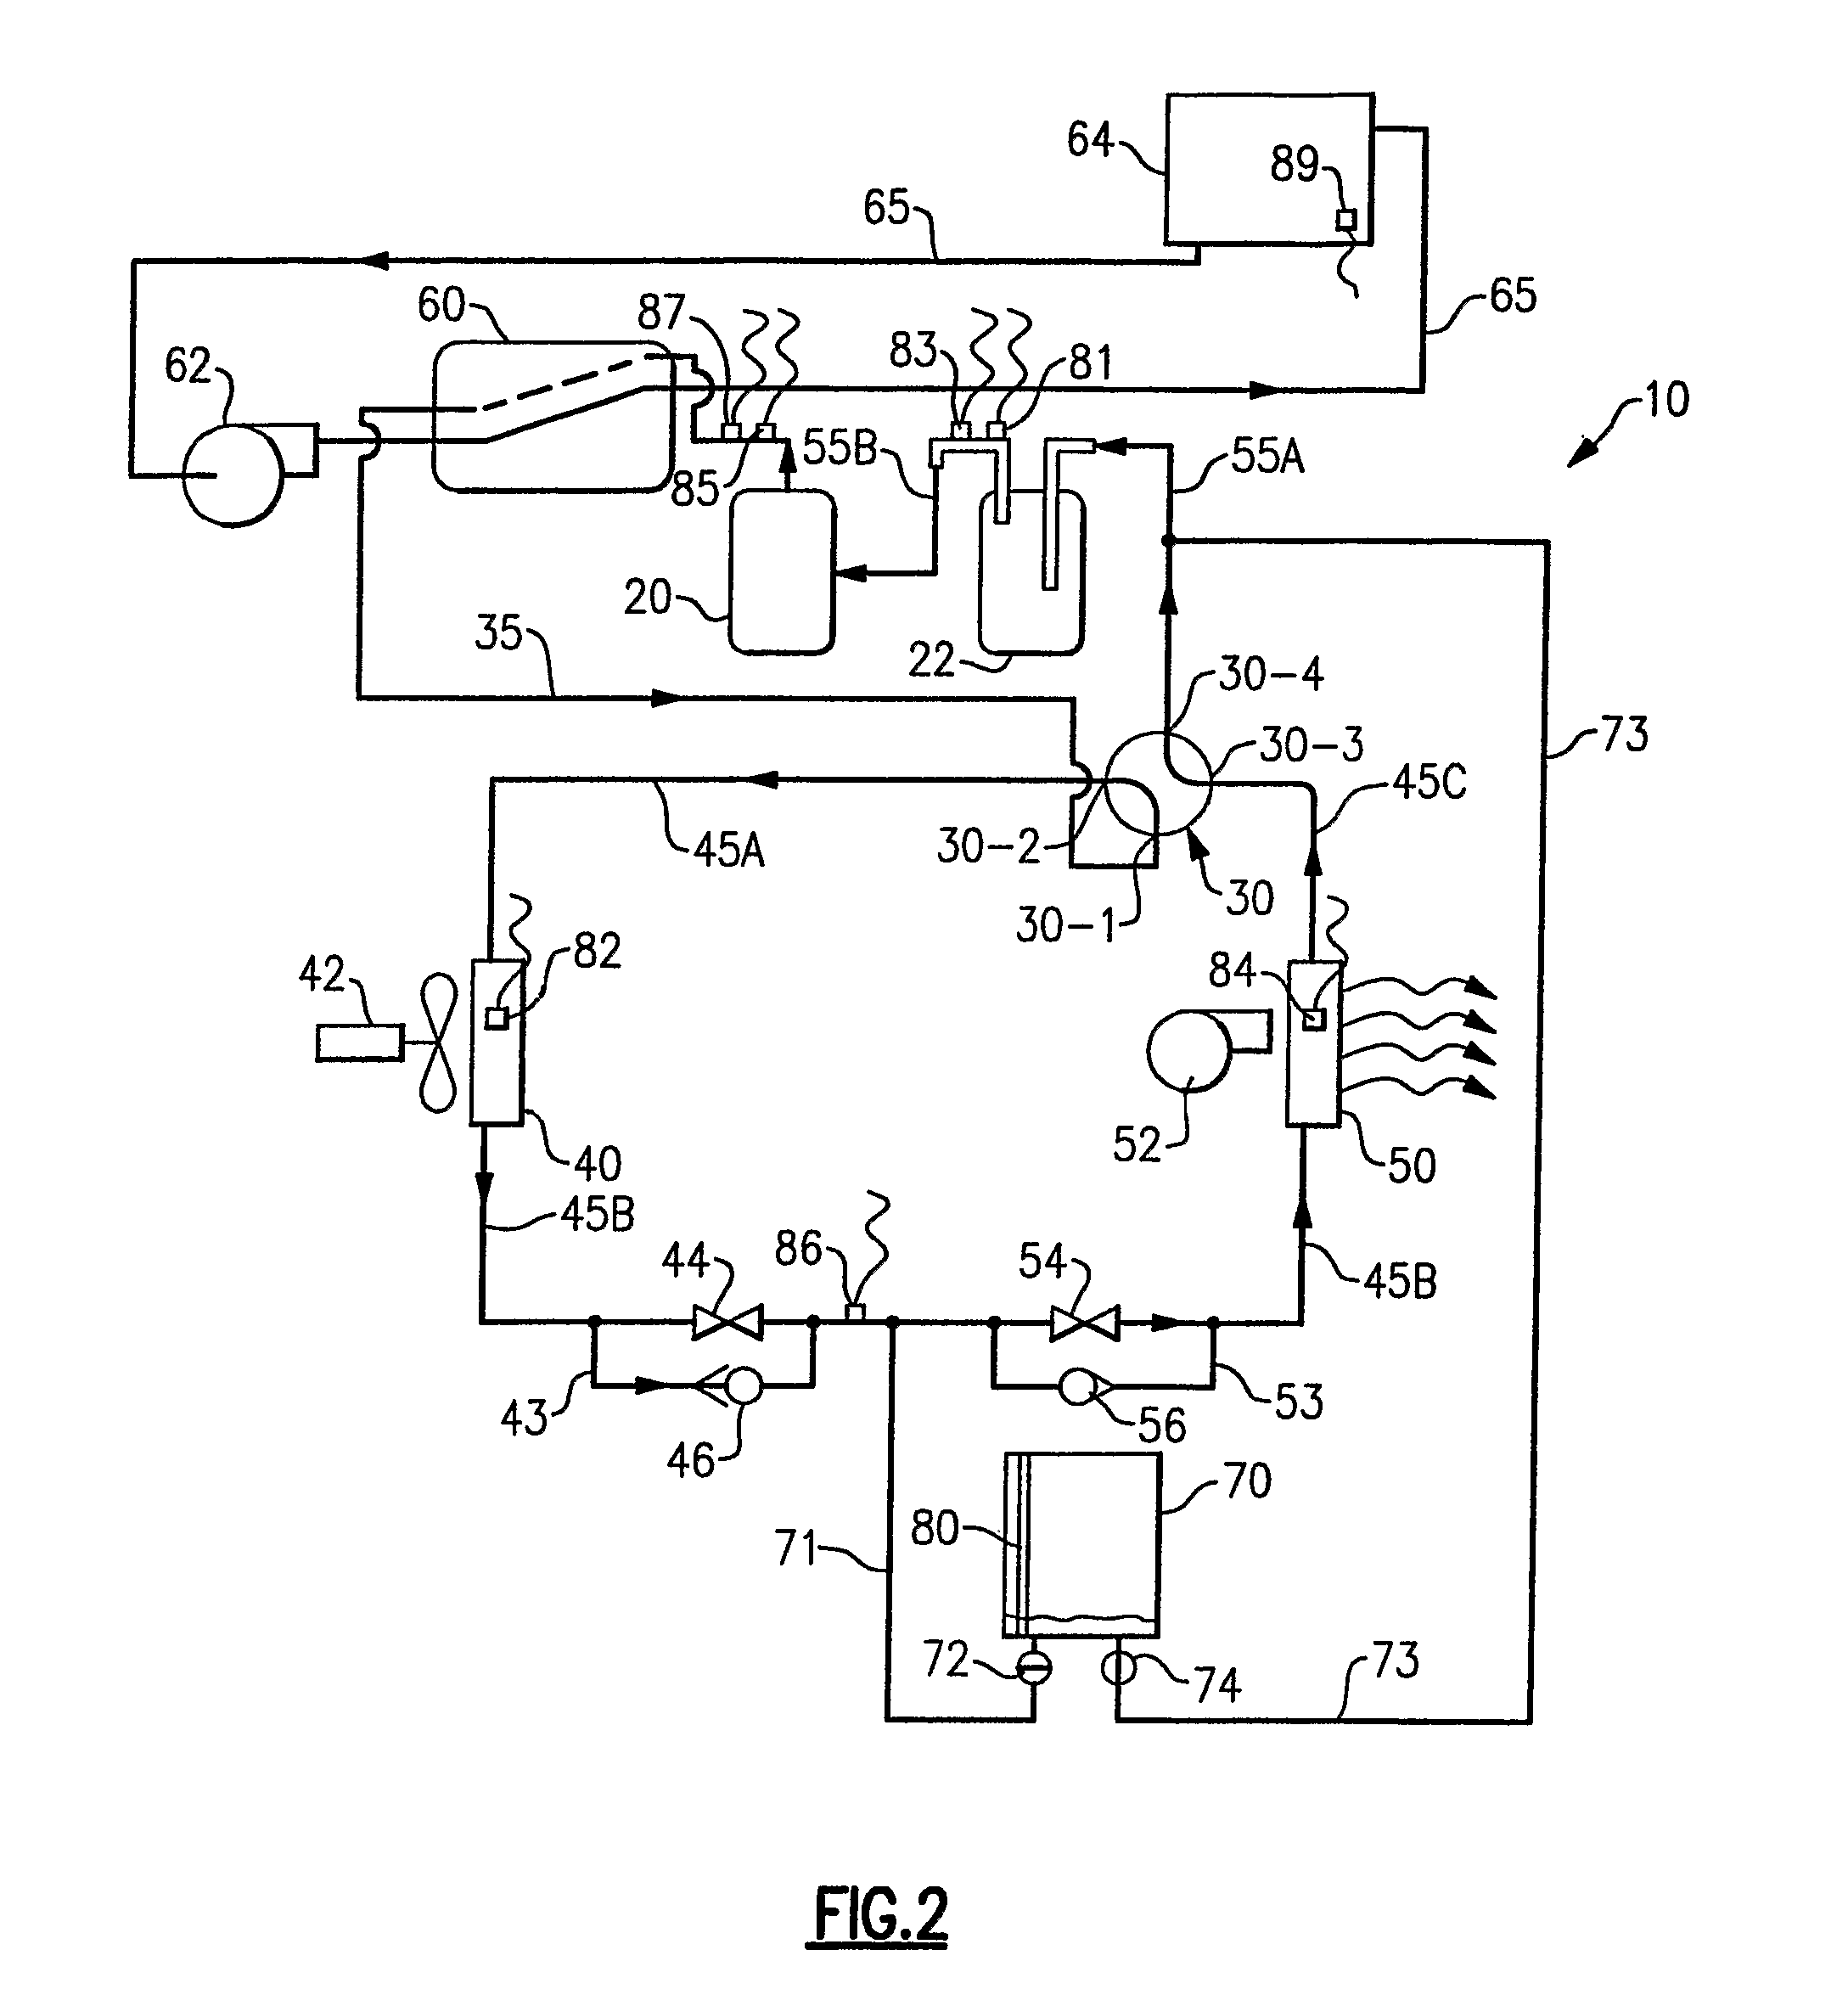 Refrigerant charge control in a heat pump system with water heater